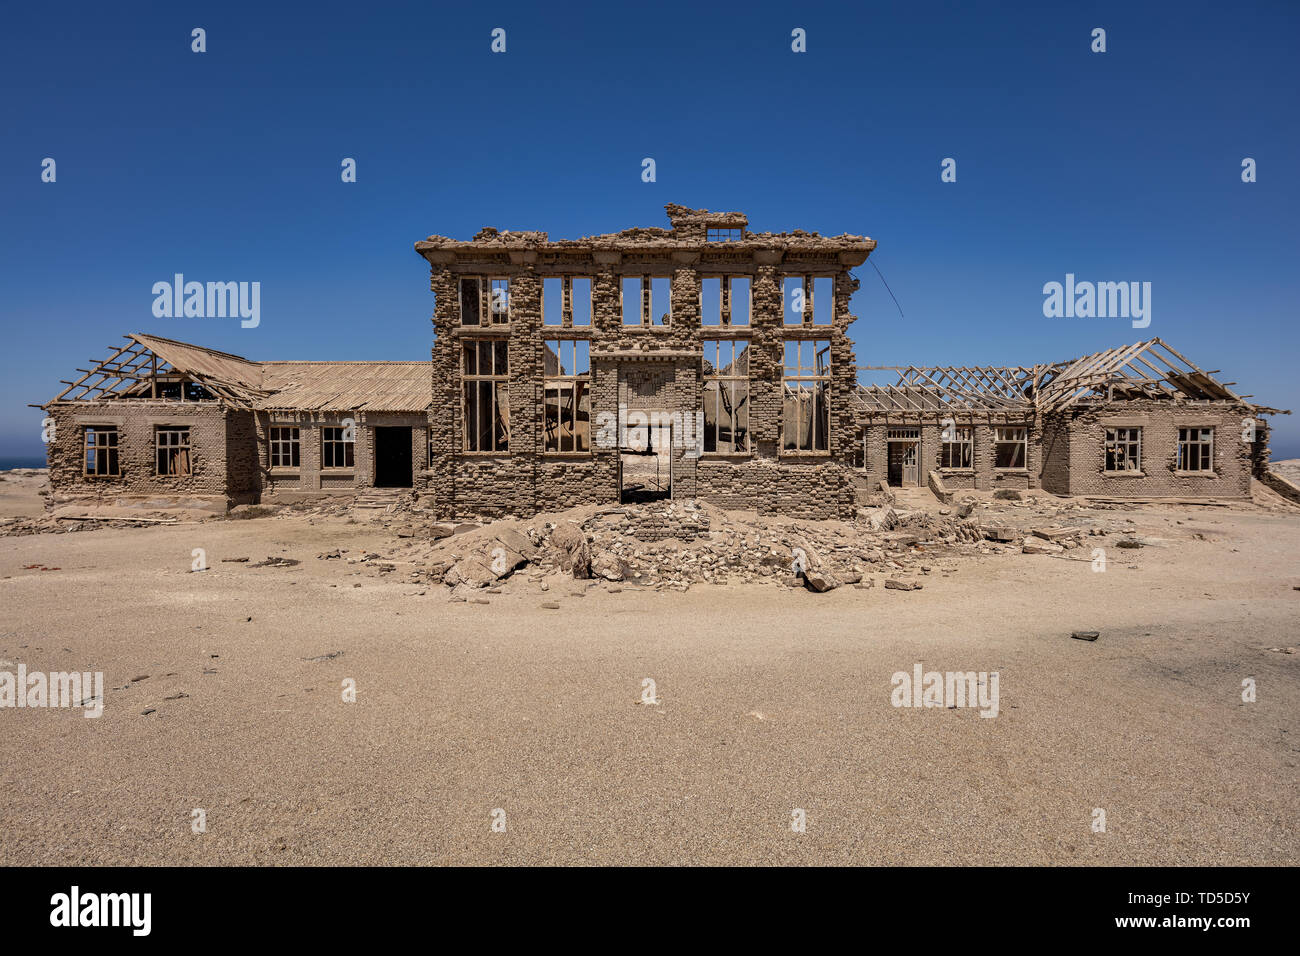 A disused Casino in the Abandoned Mining Town of Elizabeth Bay, on the coast of Luderitz around 25km from Kolmonskop, Namibia, Africa Stock Photo